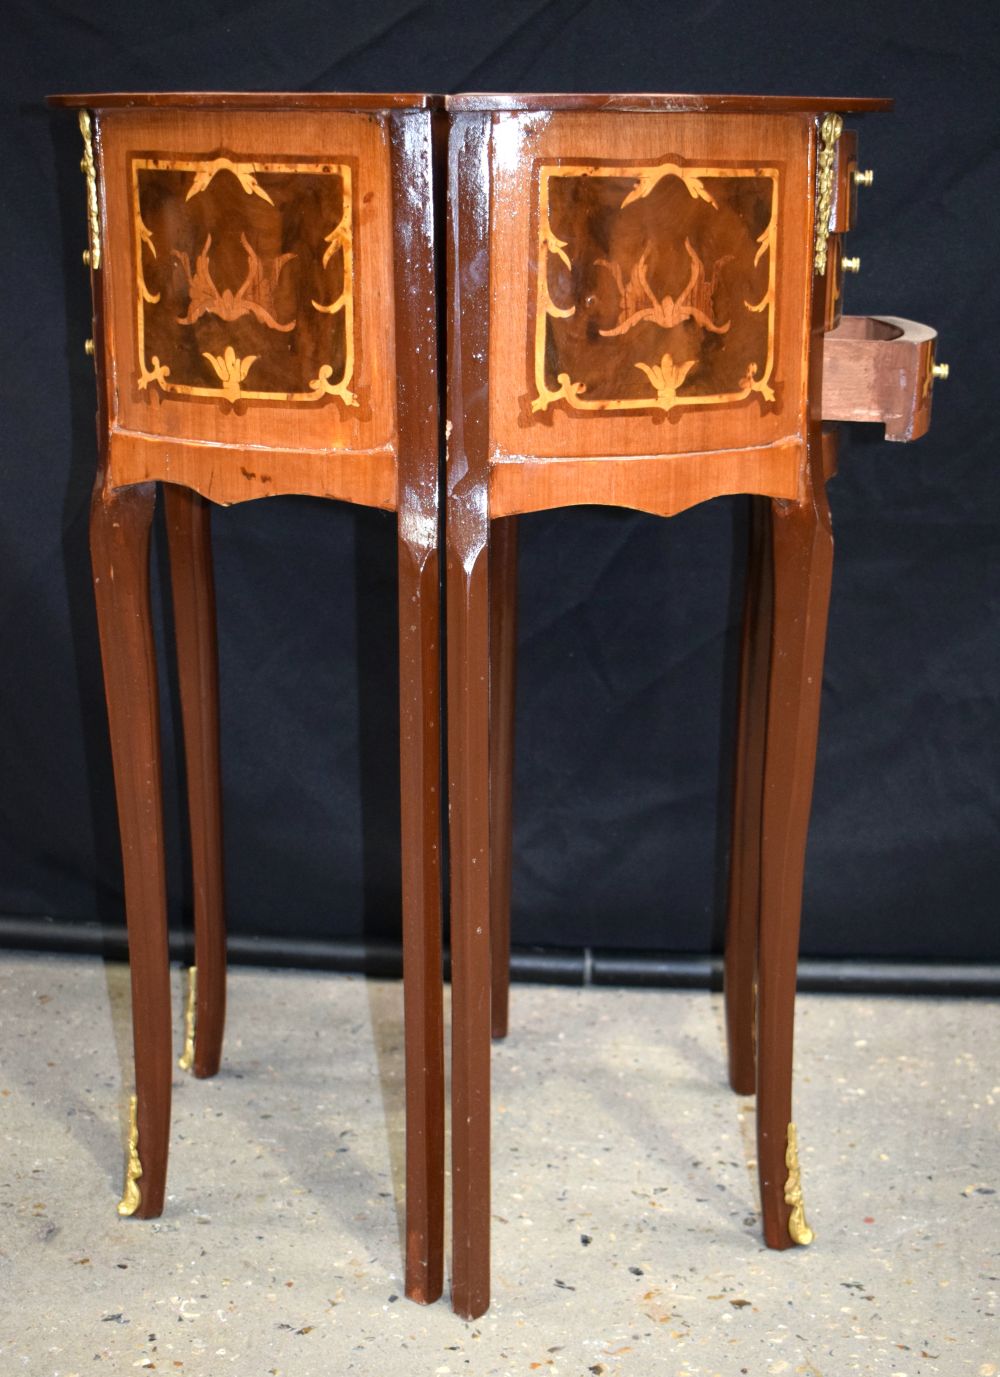 A pair of Baroque style inlaid half moon side 3 drawer tables 71 x 45 x 25cm (2) - Image 9 of 10